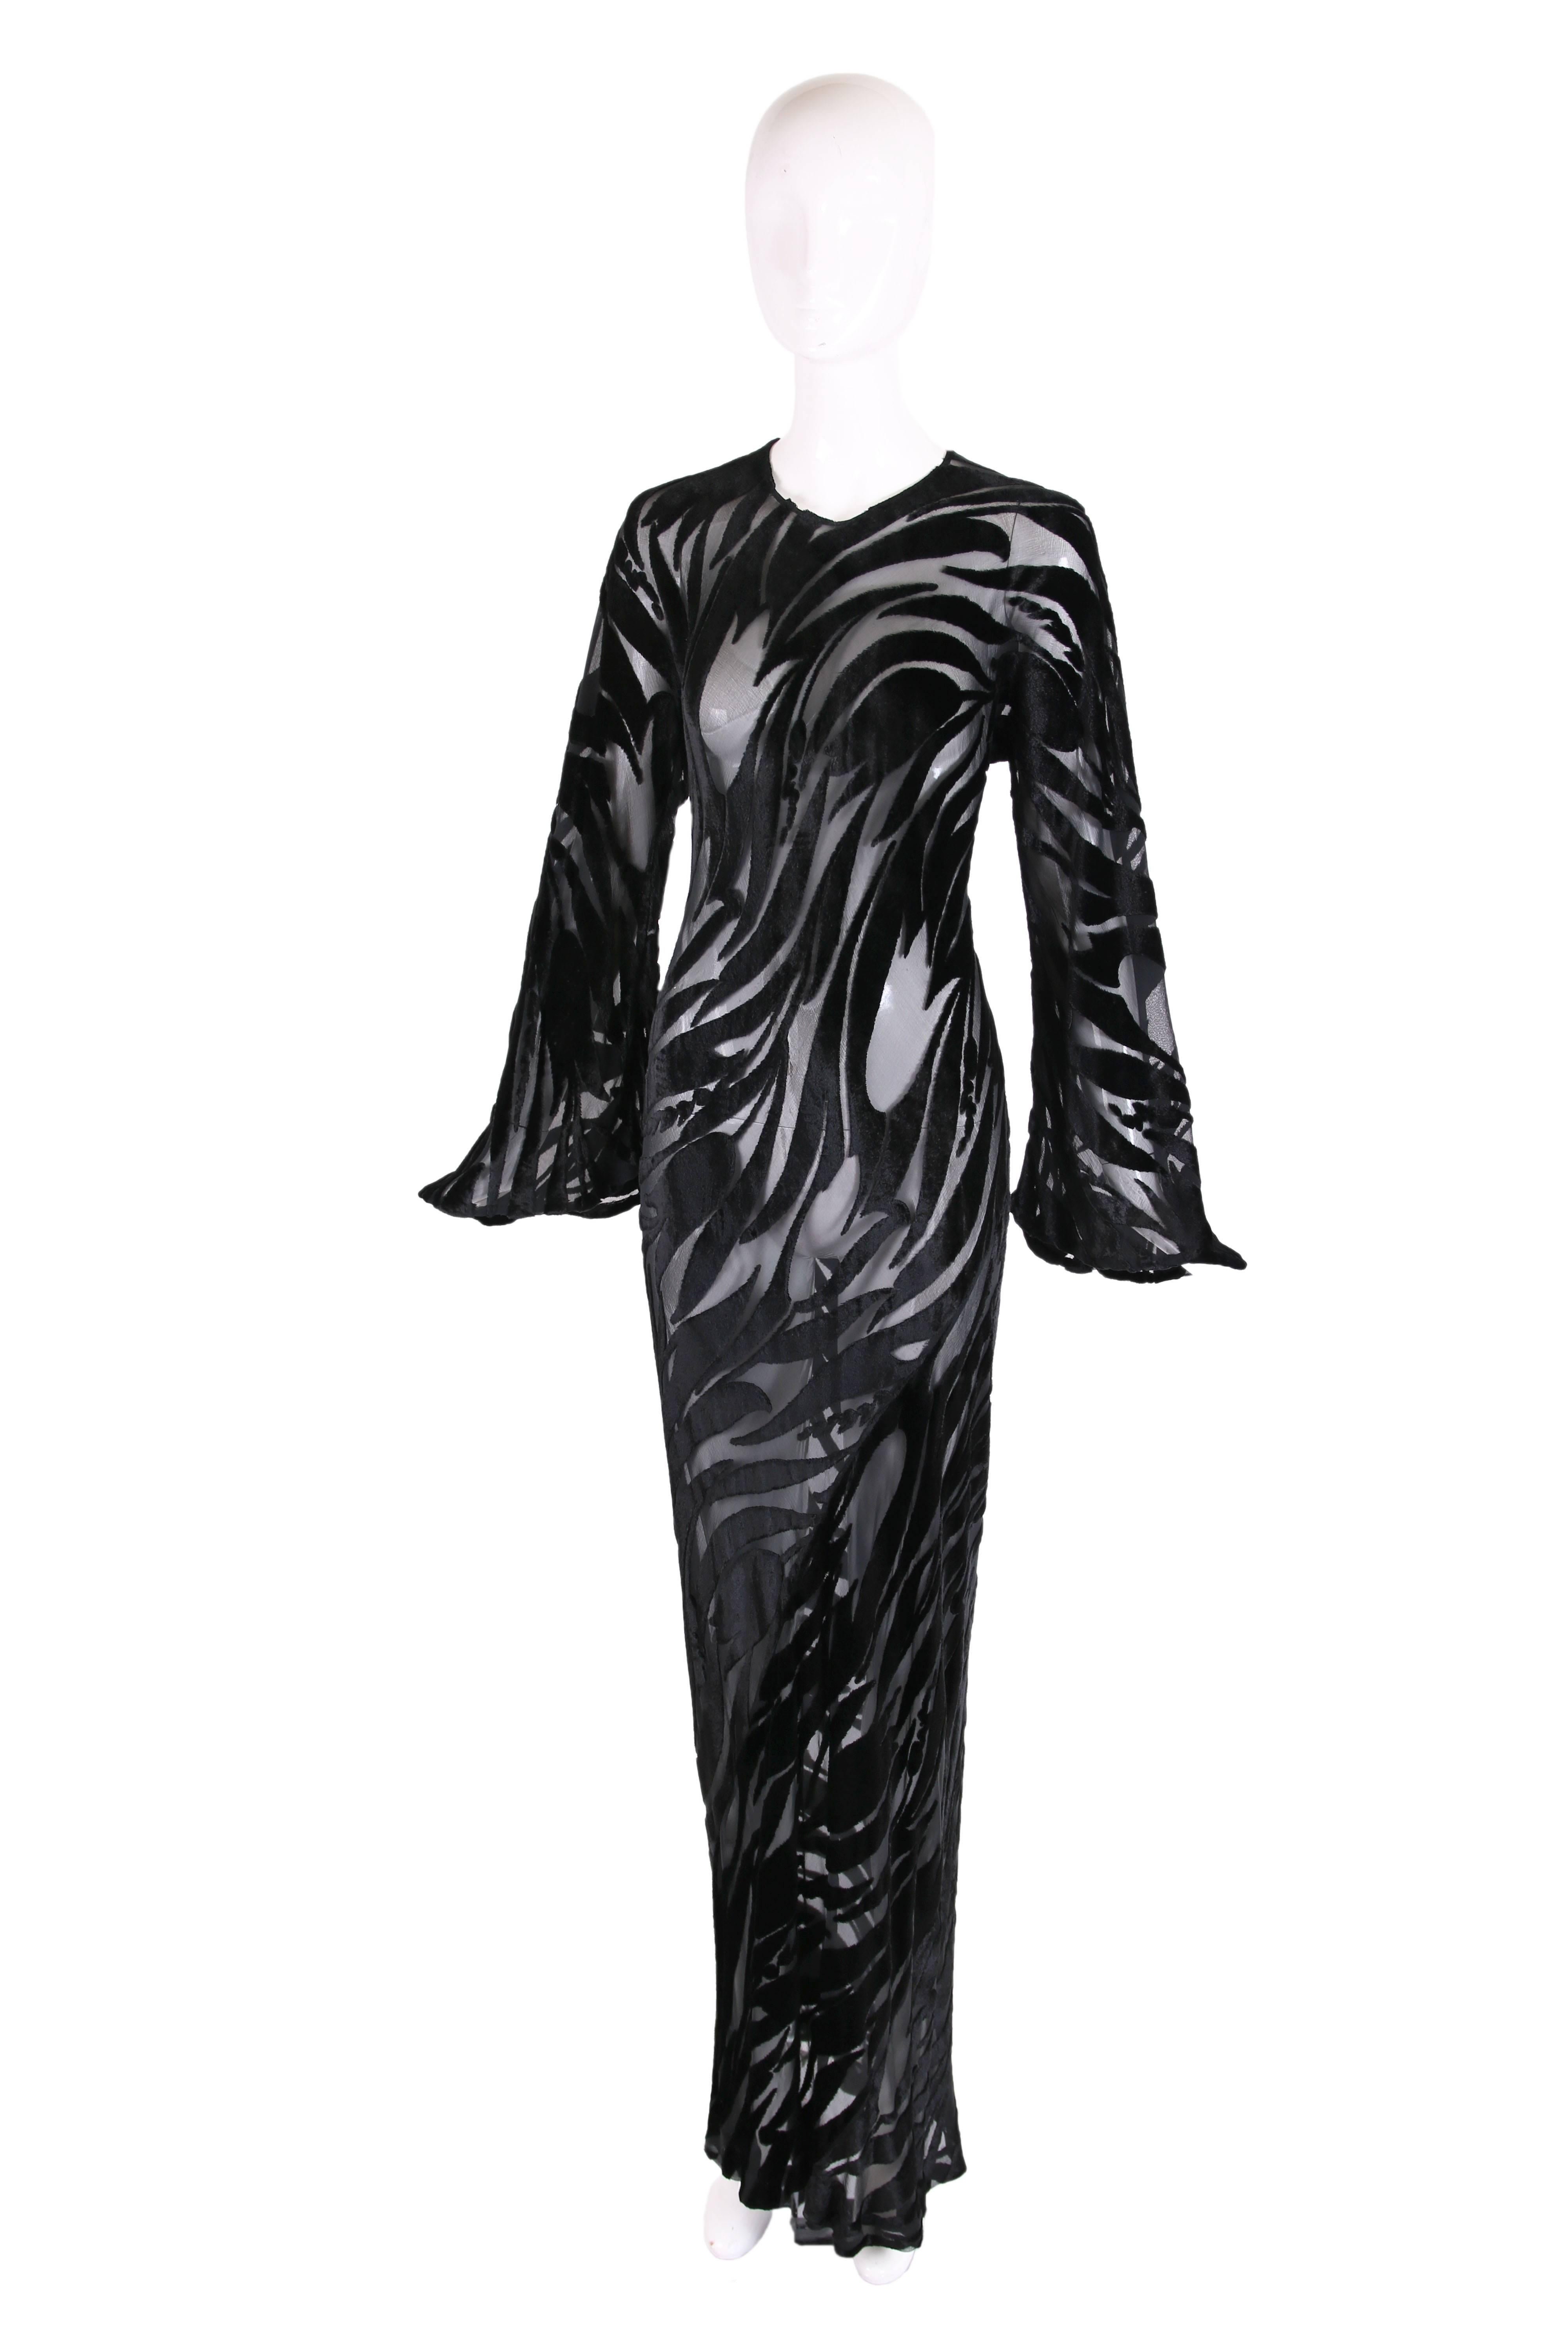 1974 Halston black silk velvet burnout bias cut evening gown w/tulip pattern and bell sleeves. At the back neck is a keyhole opening and hook closure. Gown is missing its label but it is without a doubt by Halston - see photo included in this